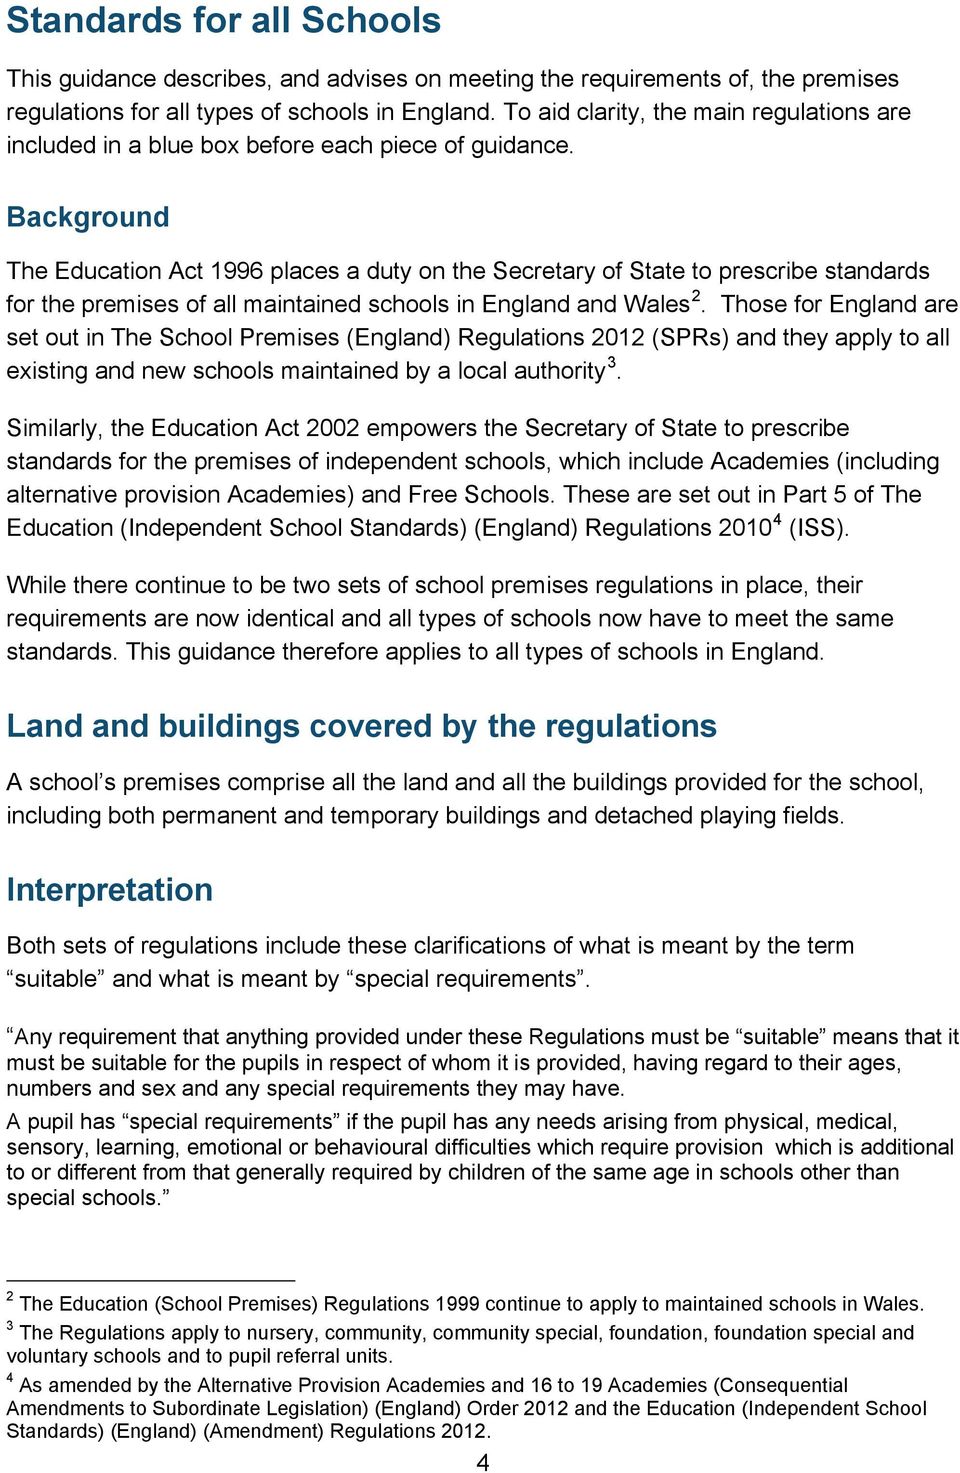 Background The Education Act 1996 places a duty on the Secretary of State to prescribe standards for the premises of all maintained schools in England and Wales 2.